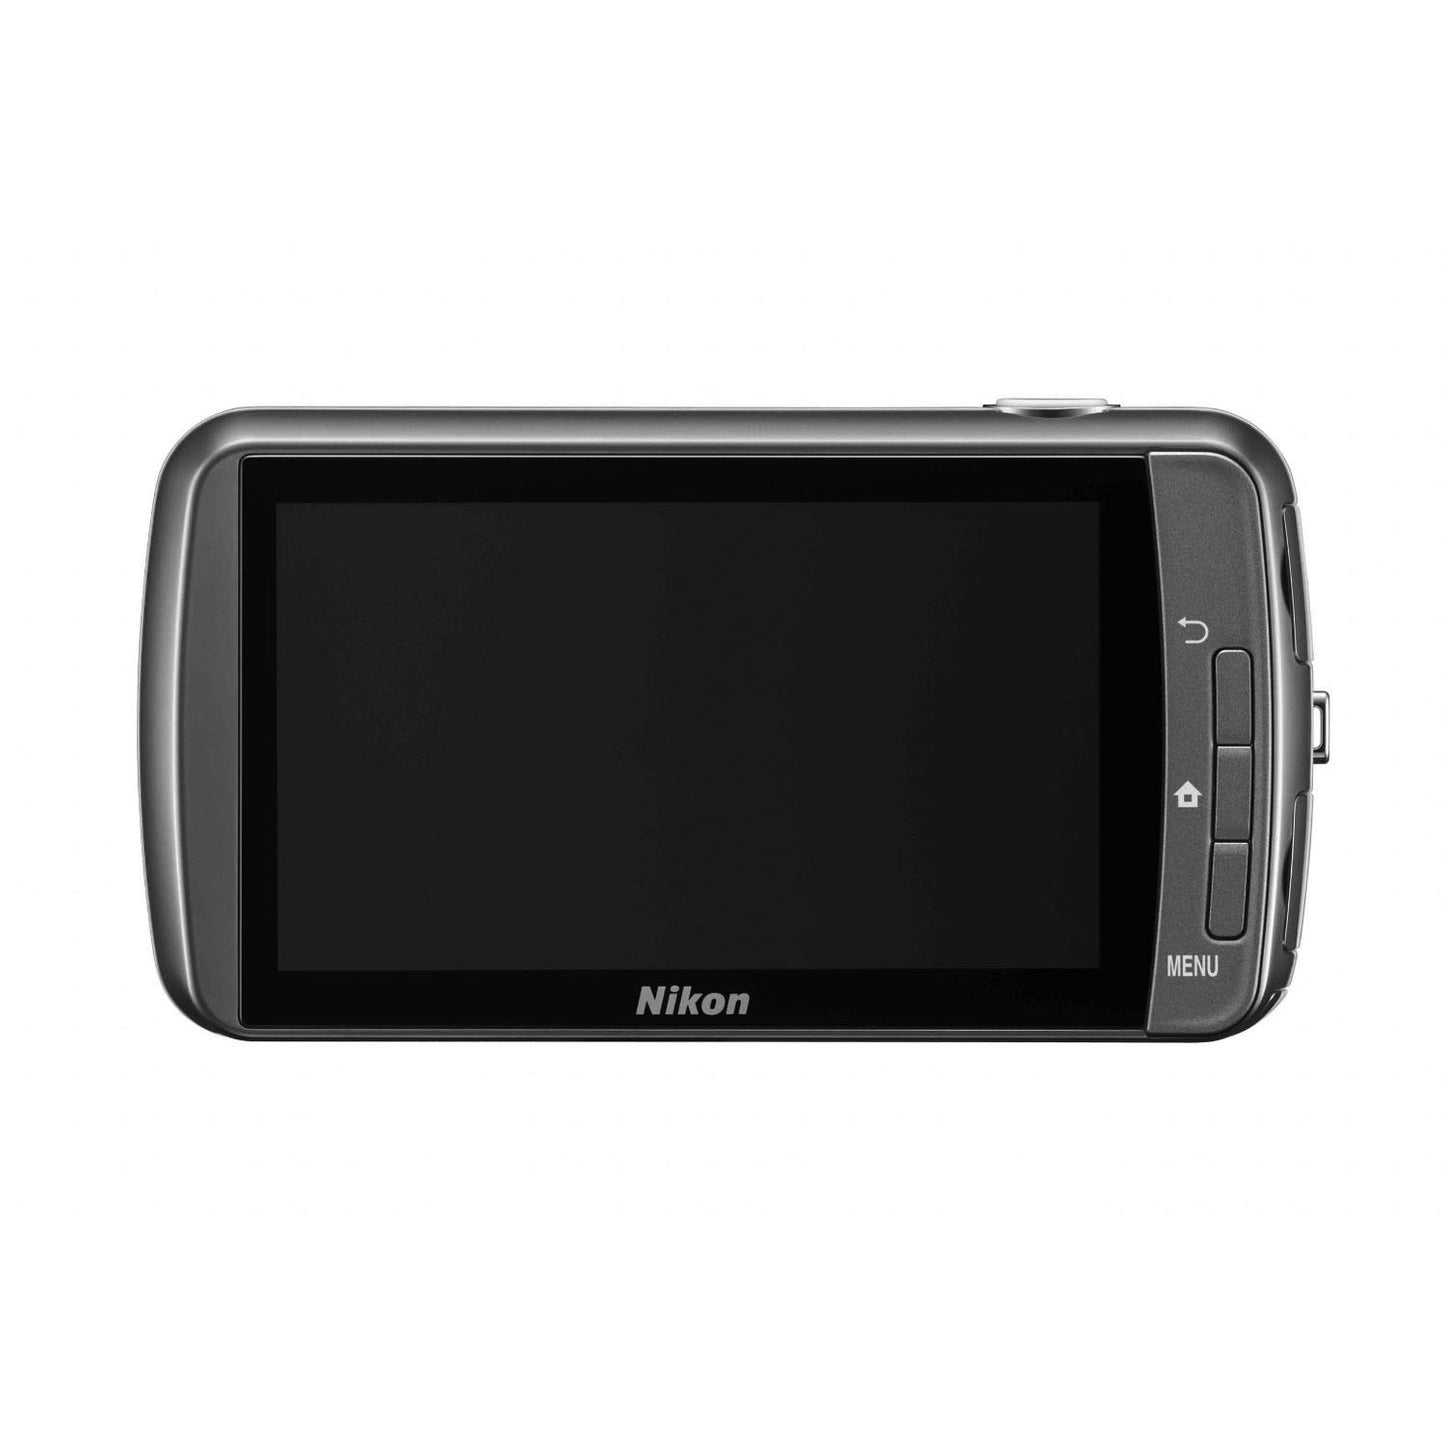 Nikon COOLPIX S800c 16 MP Digital Camera with 10x Optical Zoom and built-in Android Operating System (White) No Charger